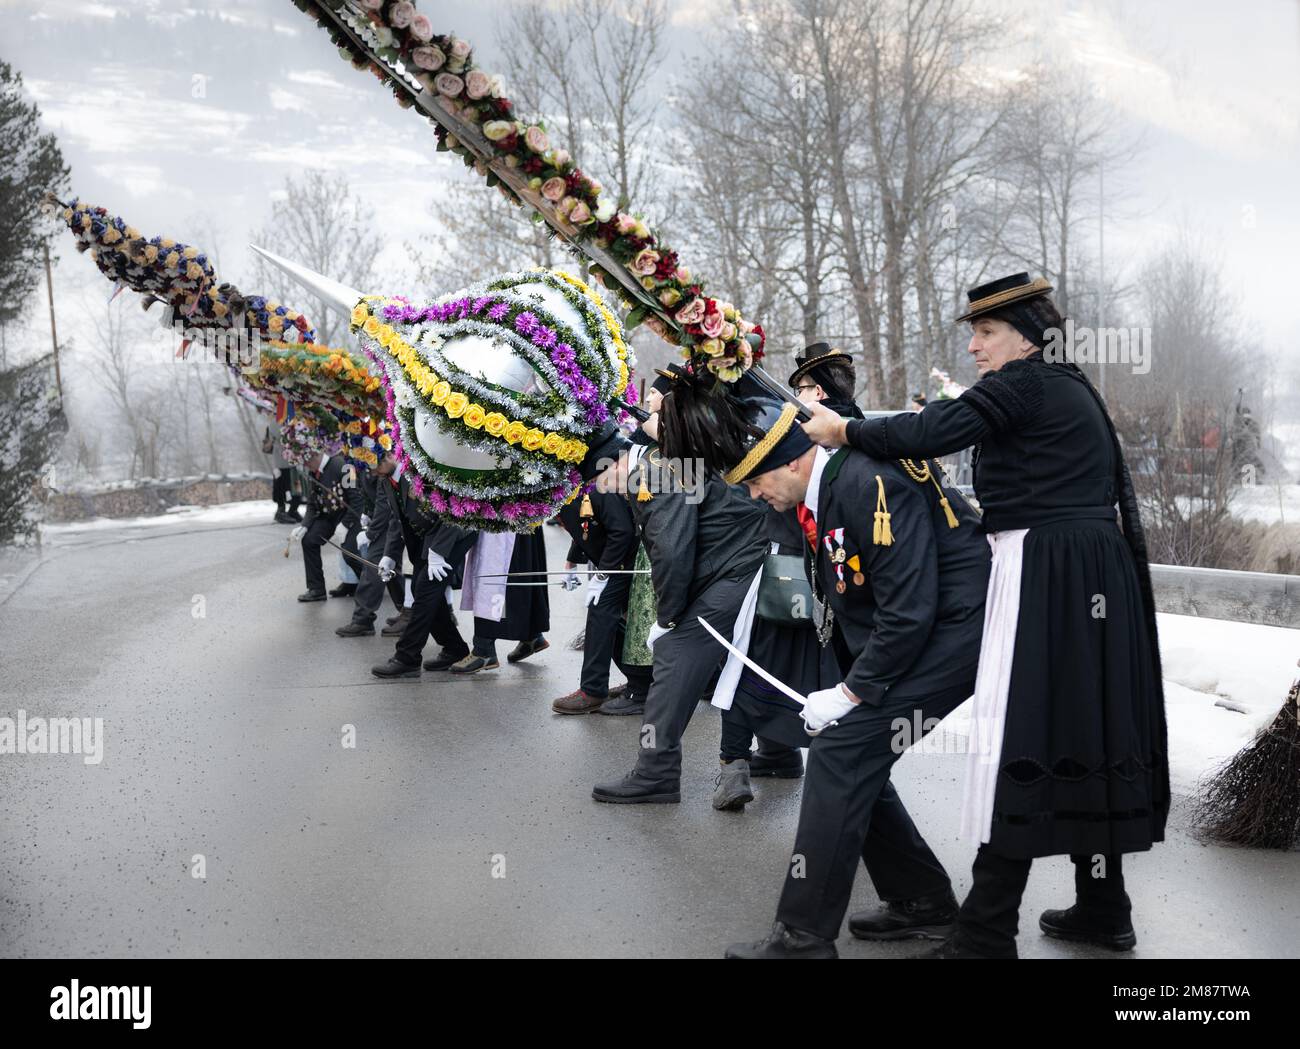 AUSTRIA, GASTEIN - January 1, 2023: Bows of the Perchts in a procession in the Austrian Gastein Valley Stock Photo